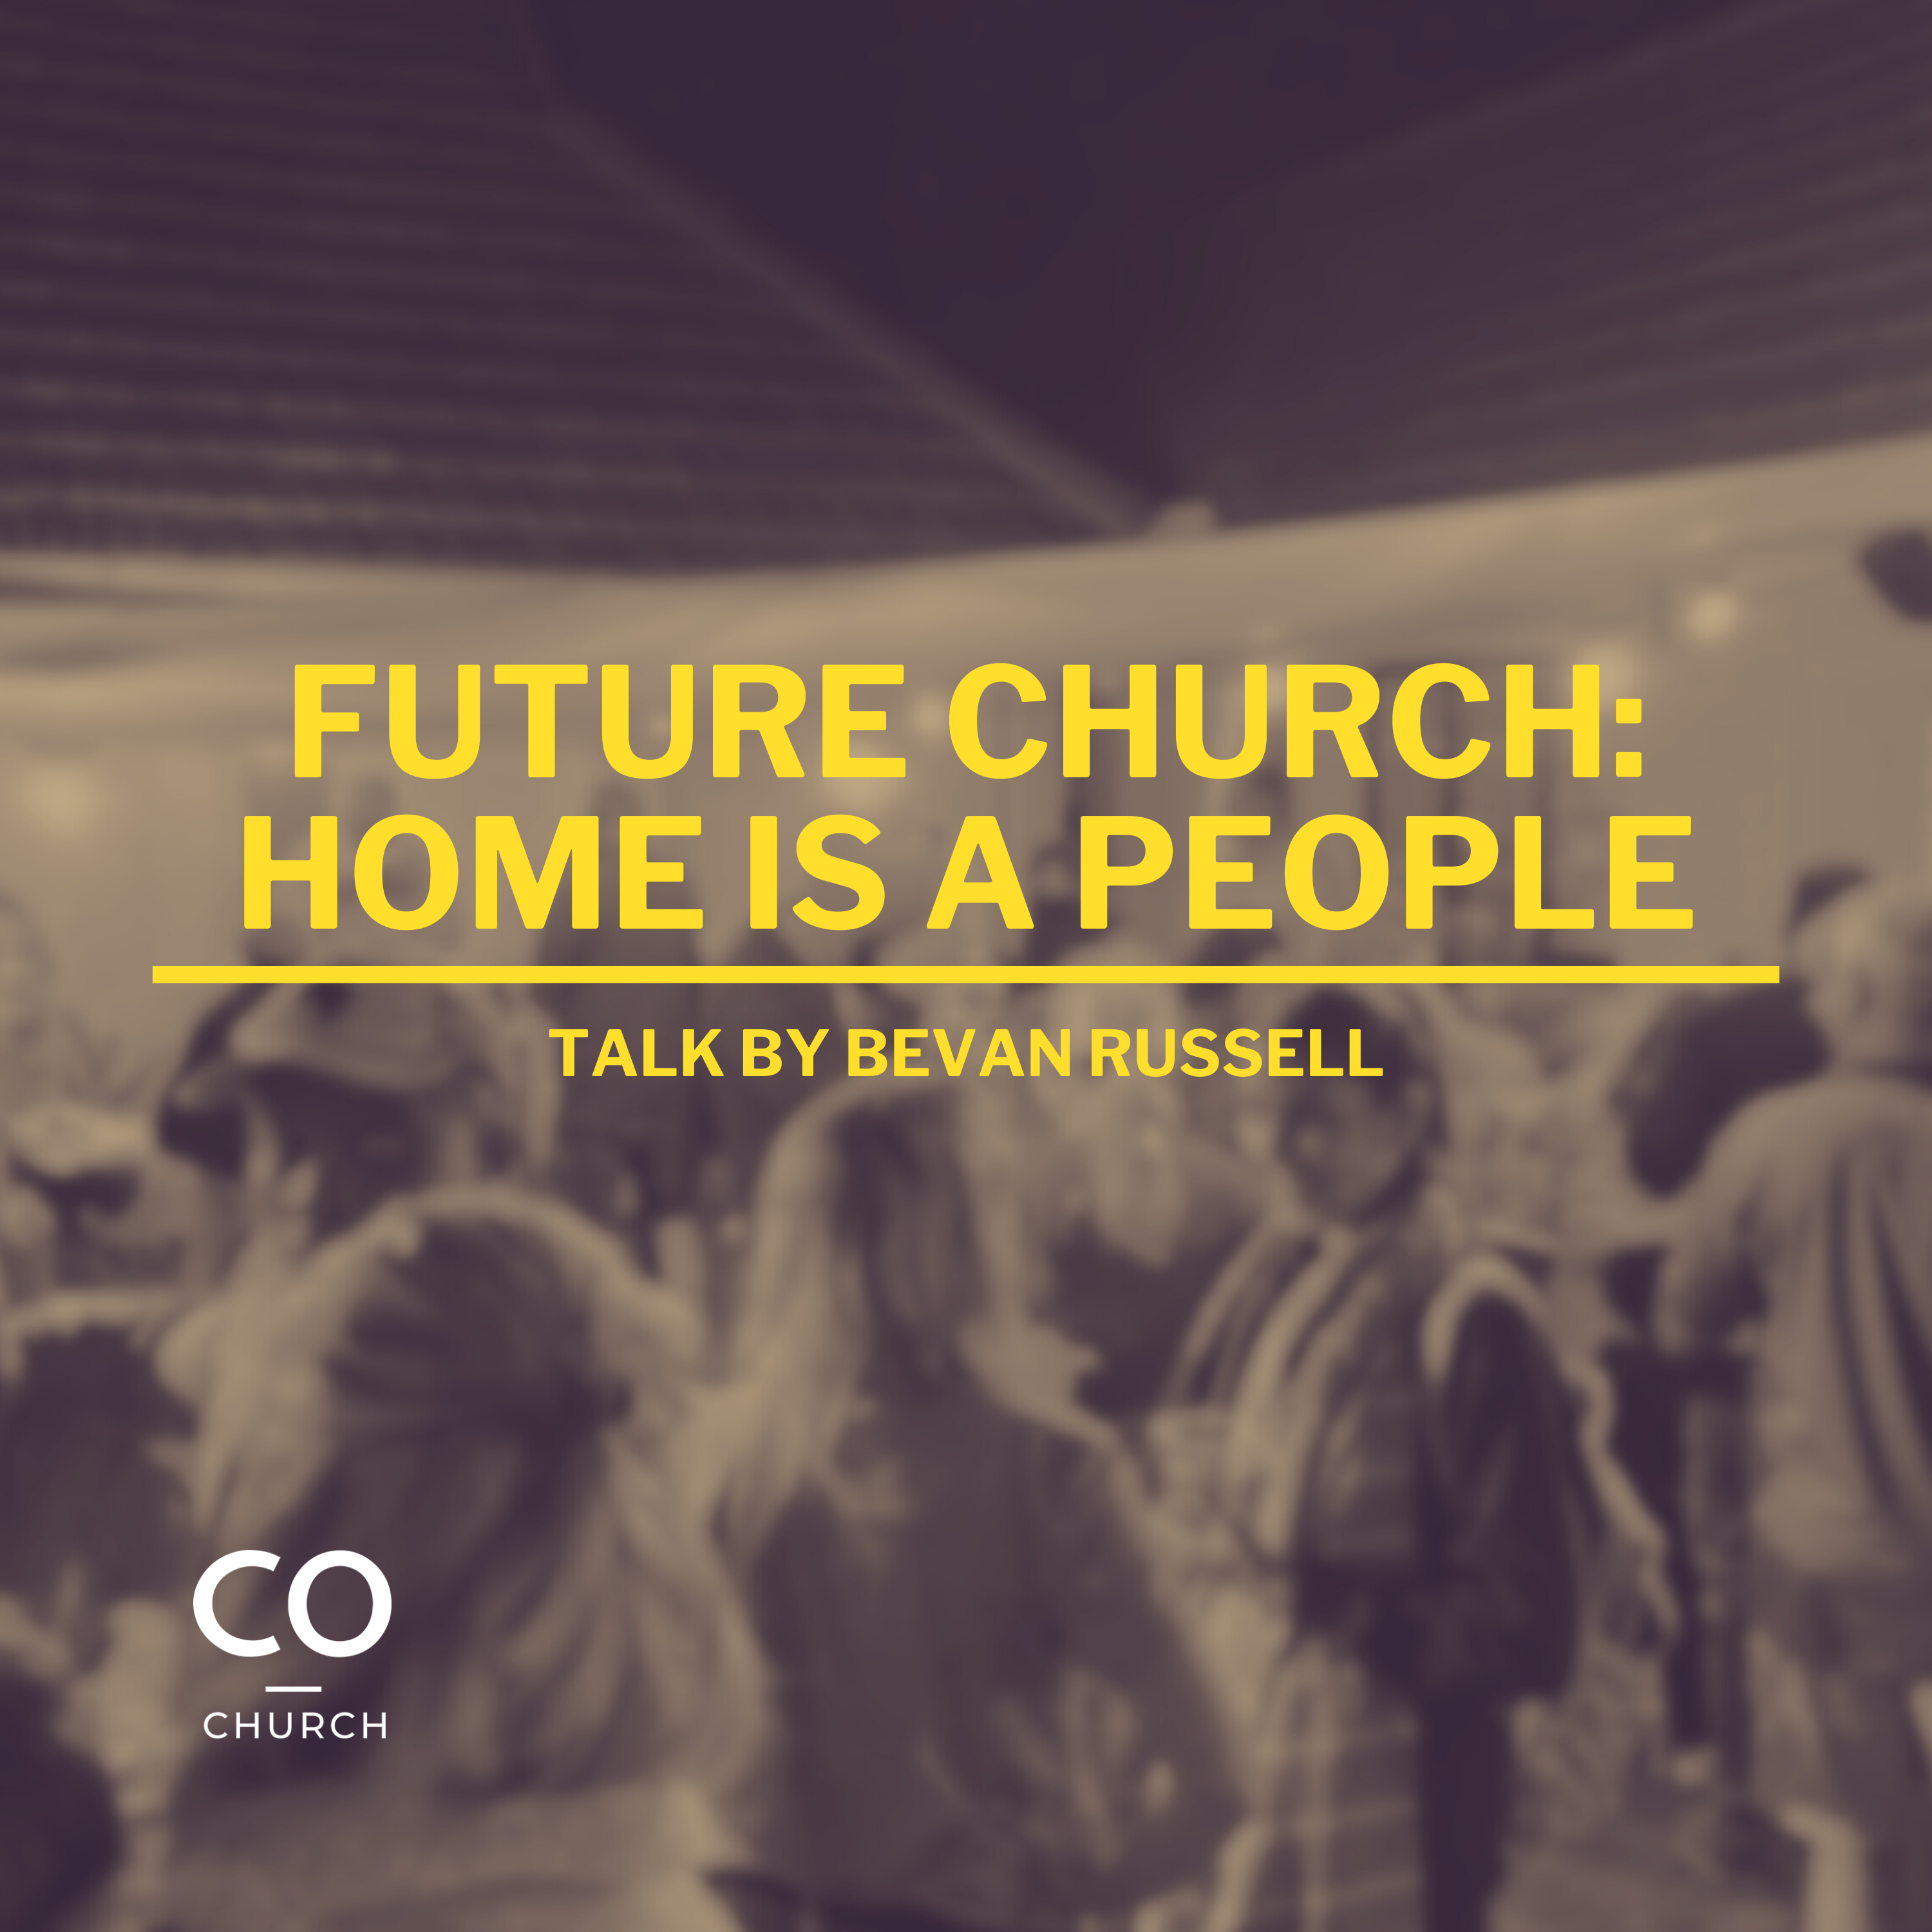 Future Church: Home is a People